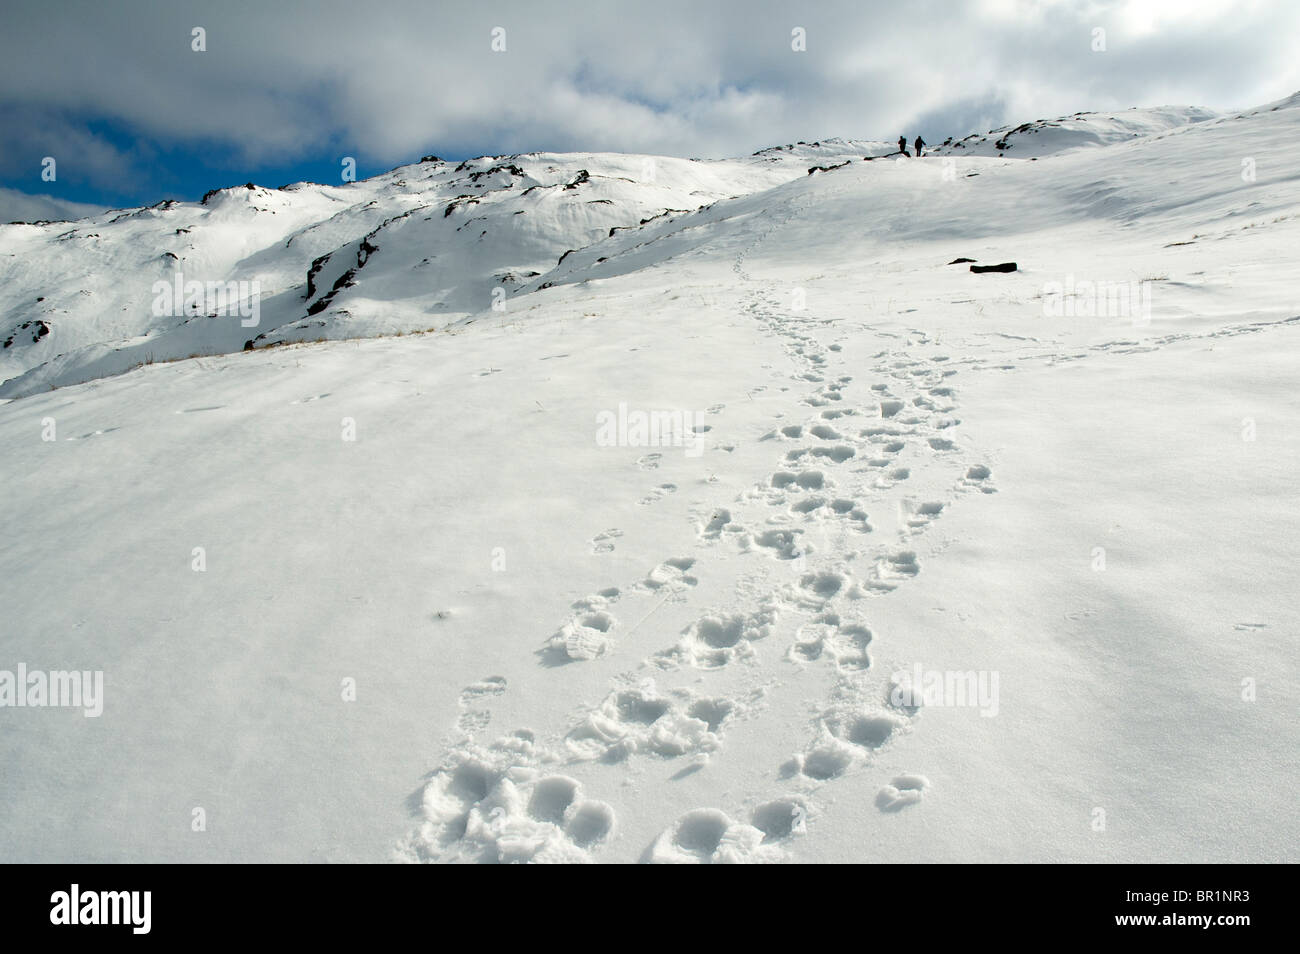 Hill walkers' footprints in snow on High Raise in winter, Easedale, near Grasmere, Lake District, Cumbria, England, UK Stock Photo